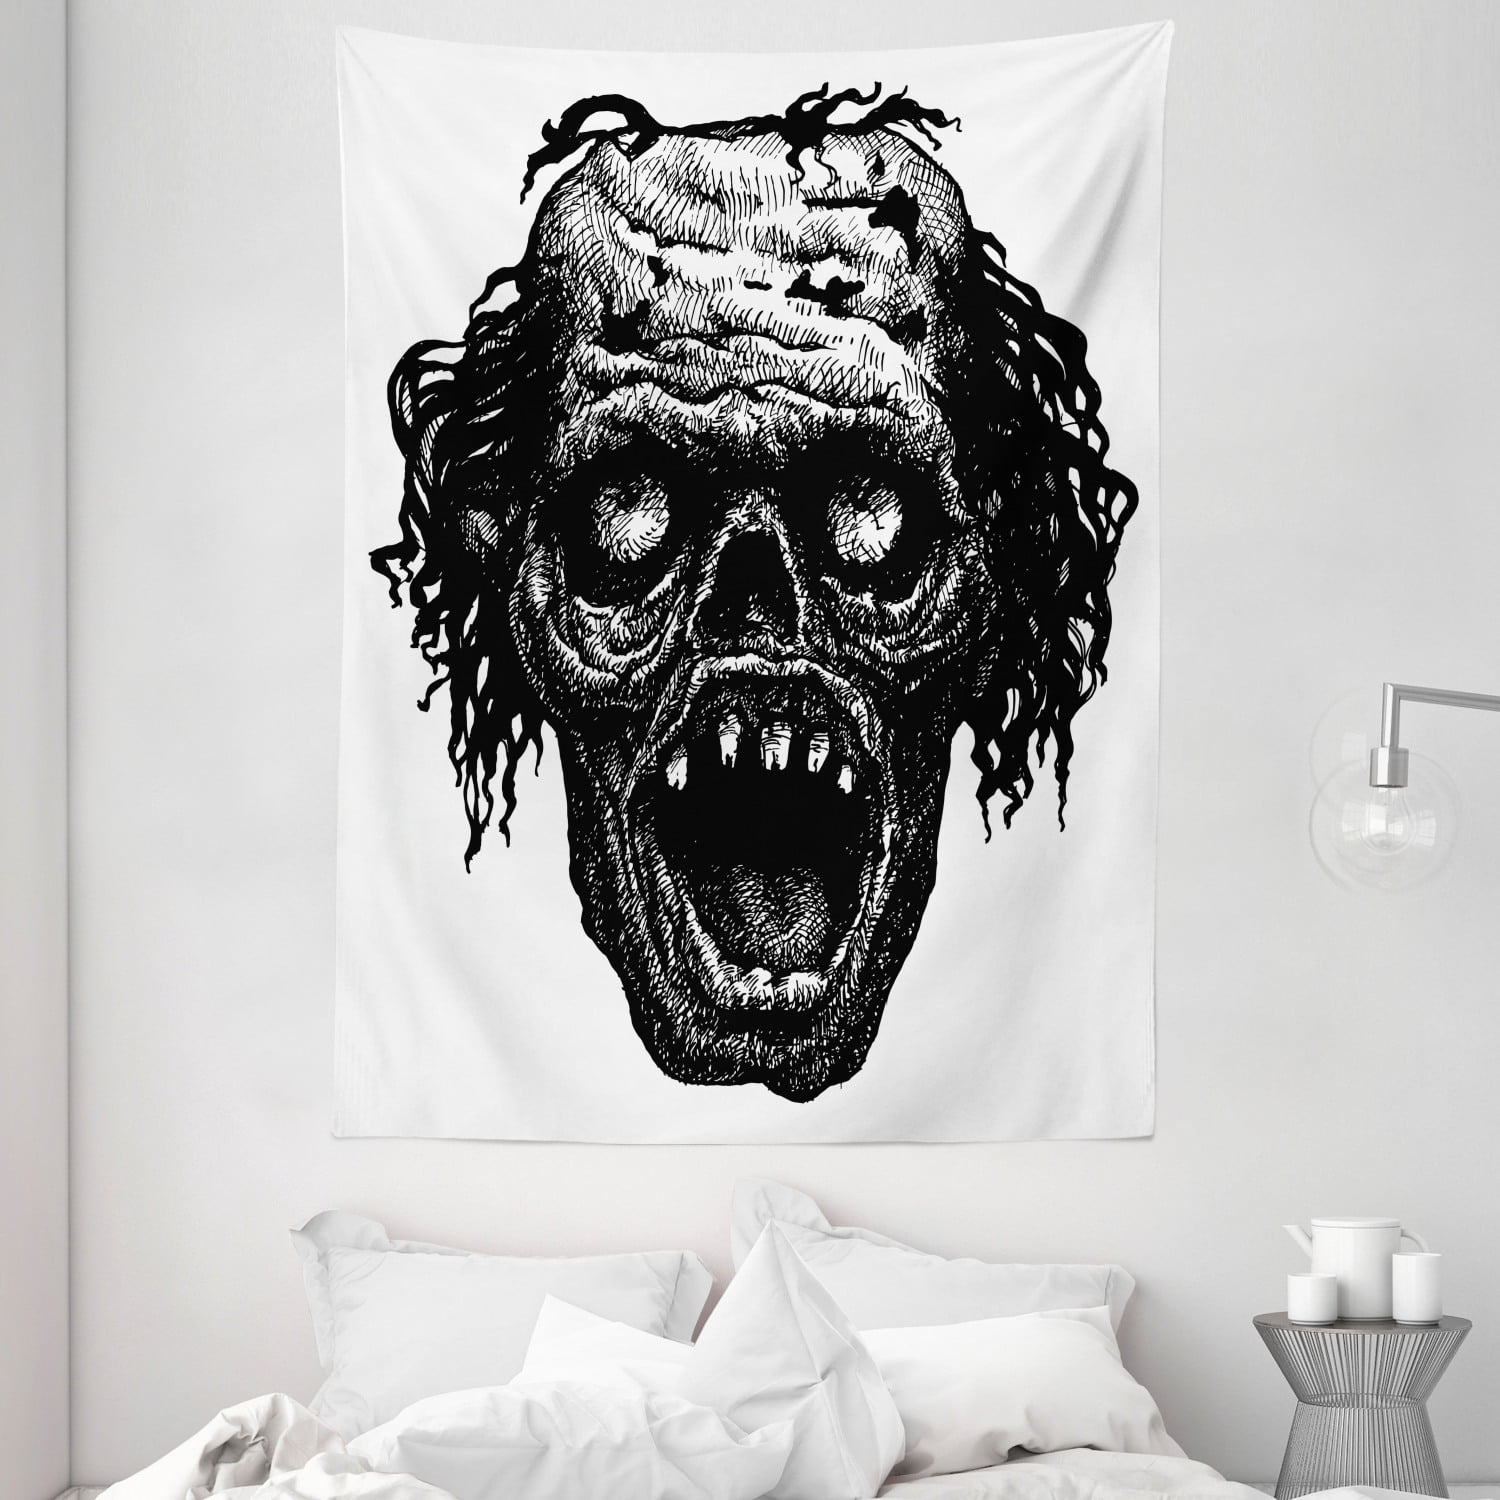 Halloween Tapestry, Zombie Head Evil Dead Man Portrait Fiction Creature Scary Monster Graphic, Wall Hanging for Bedroom Living Room Dorm Decor, 40W X 60L Inches, Black Dark Grey, by Ambesonne - Walmart.com